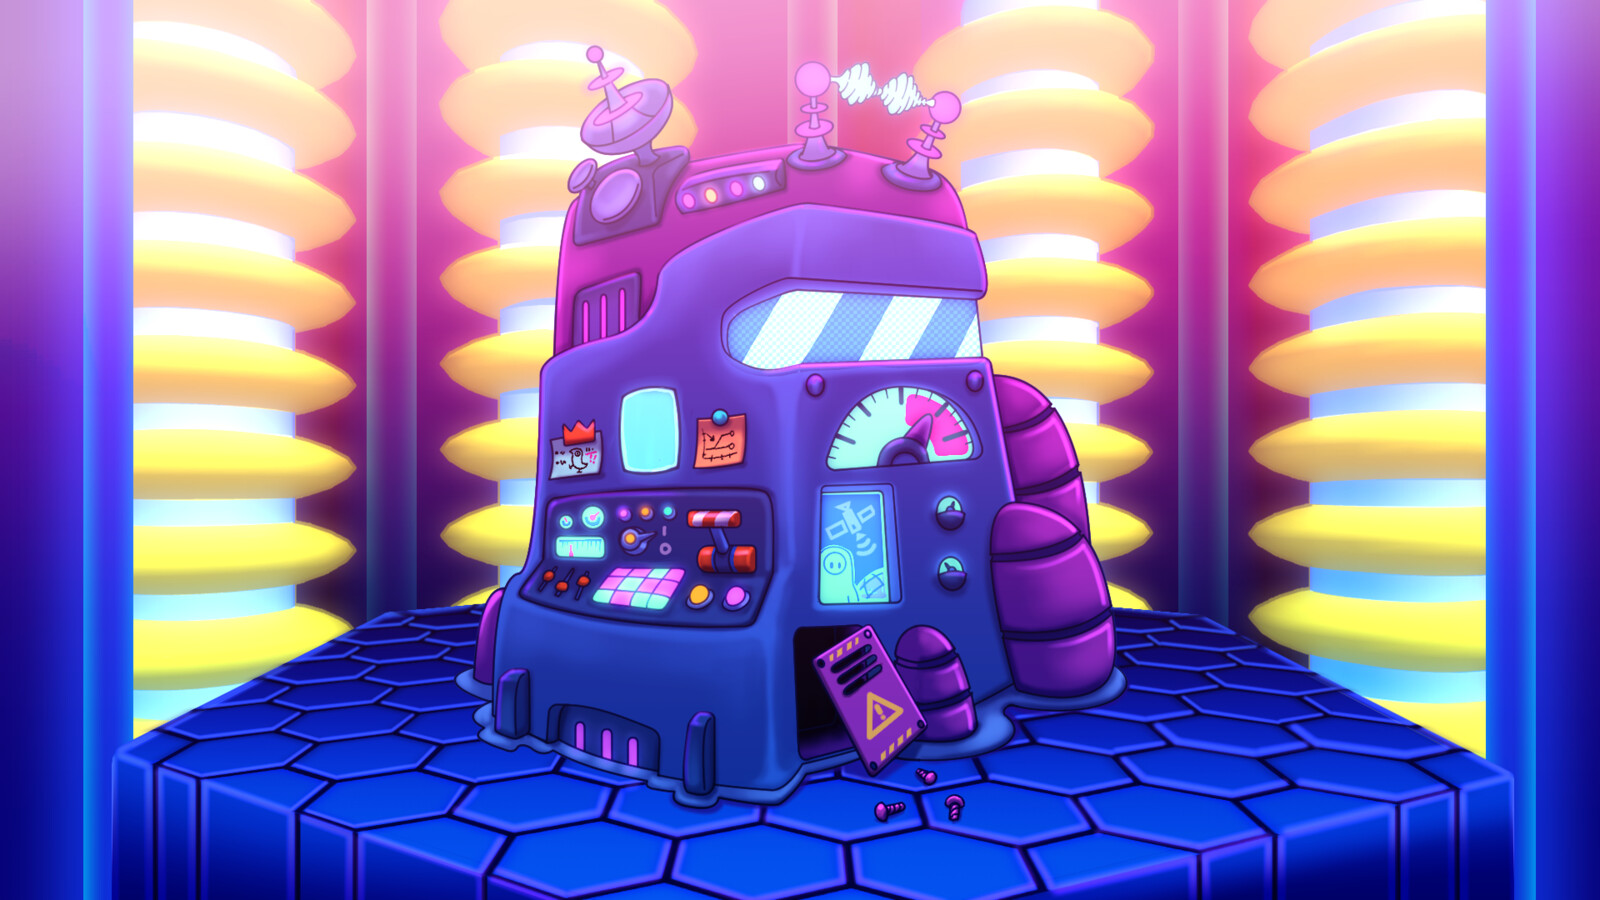 Mysterious machine room environment concept.